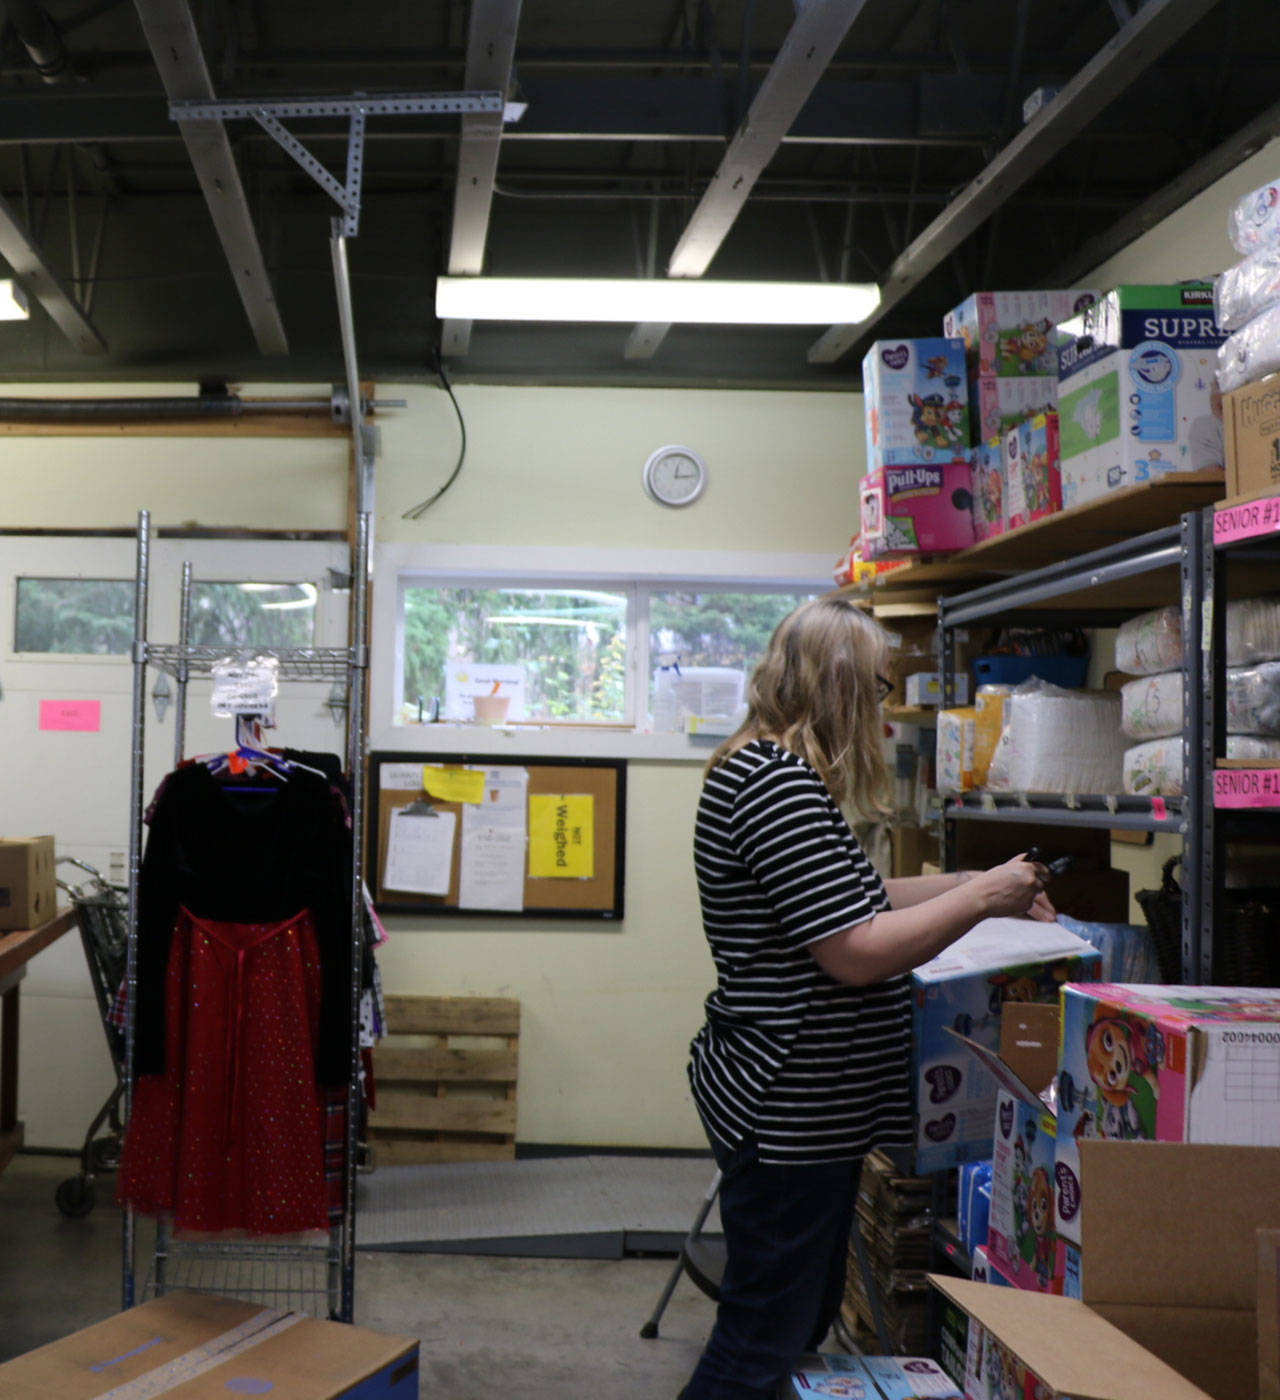 A volunteer for Sharenet takes inventory of food and clothing items.